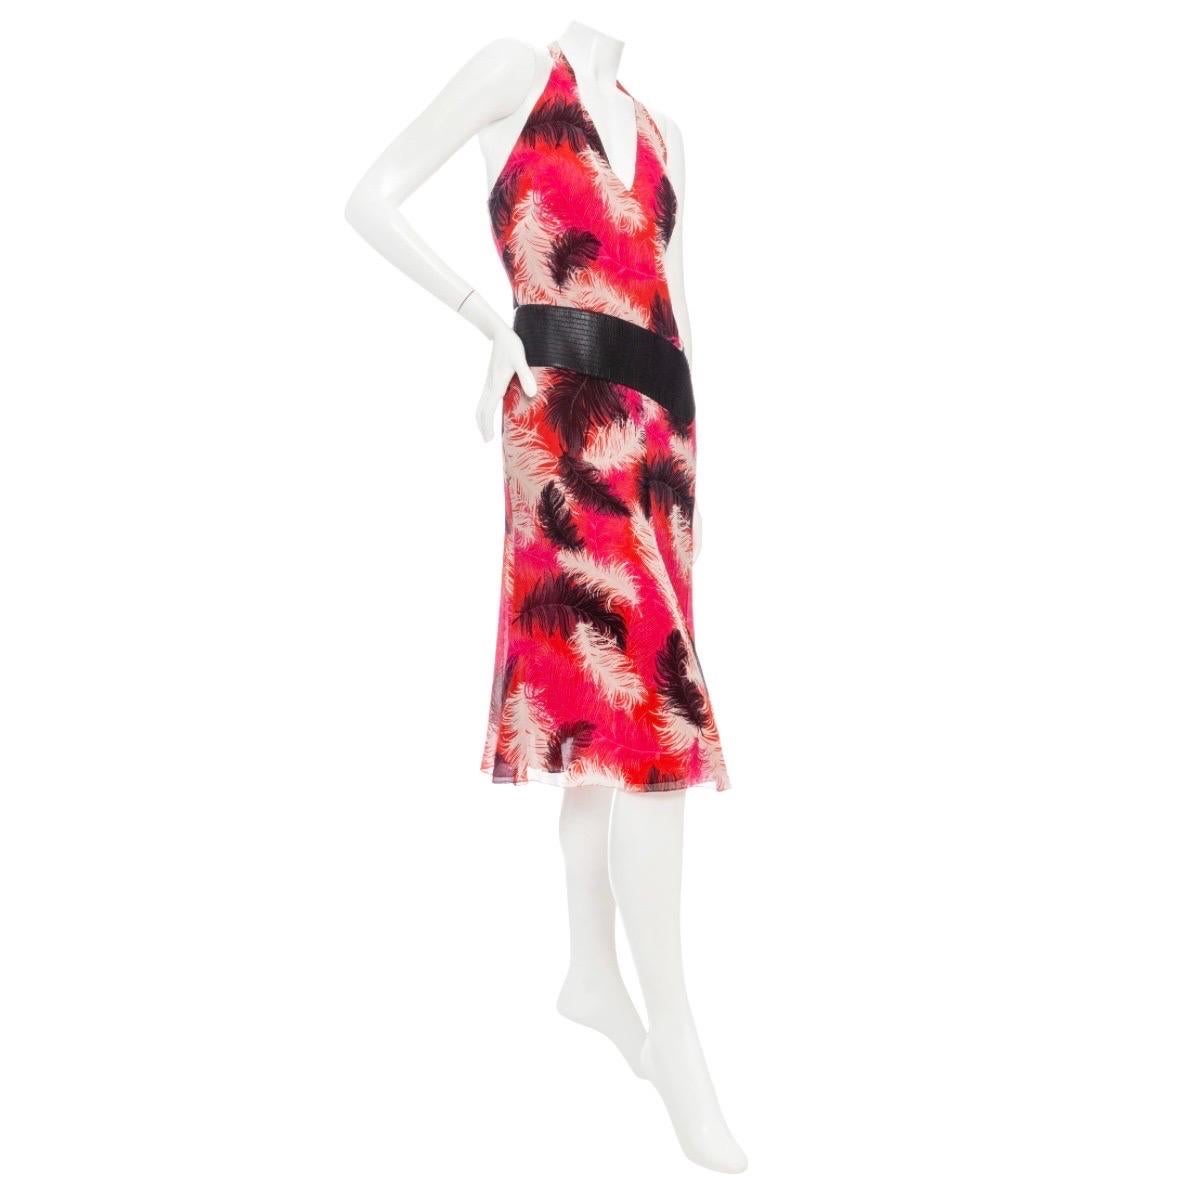 Gianni Versace 2001 Pink Silk-Blend Feather Print Halter Dress

Vintage; Fall 2001 Collection
Multicolored: Pink, Red, Black, White
Feather print
Halter strap
V-neckline
Asymmetrical leather waistband with topstitching
Side zipper